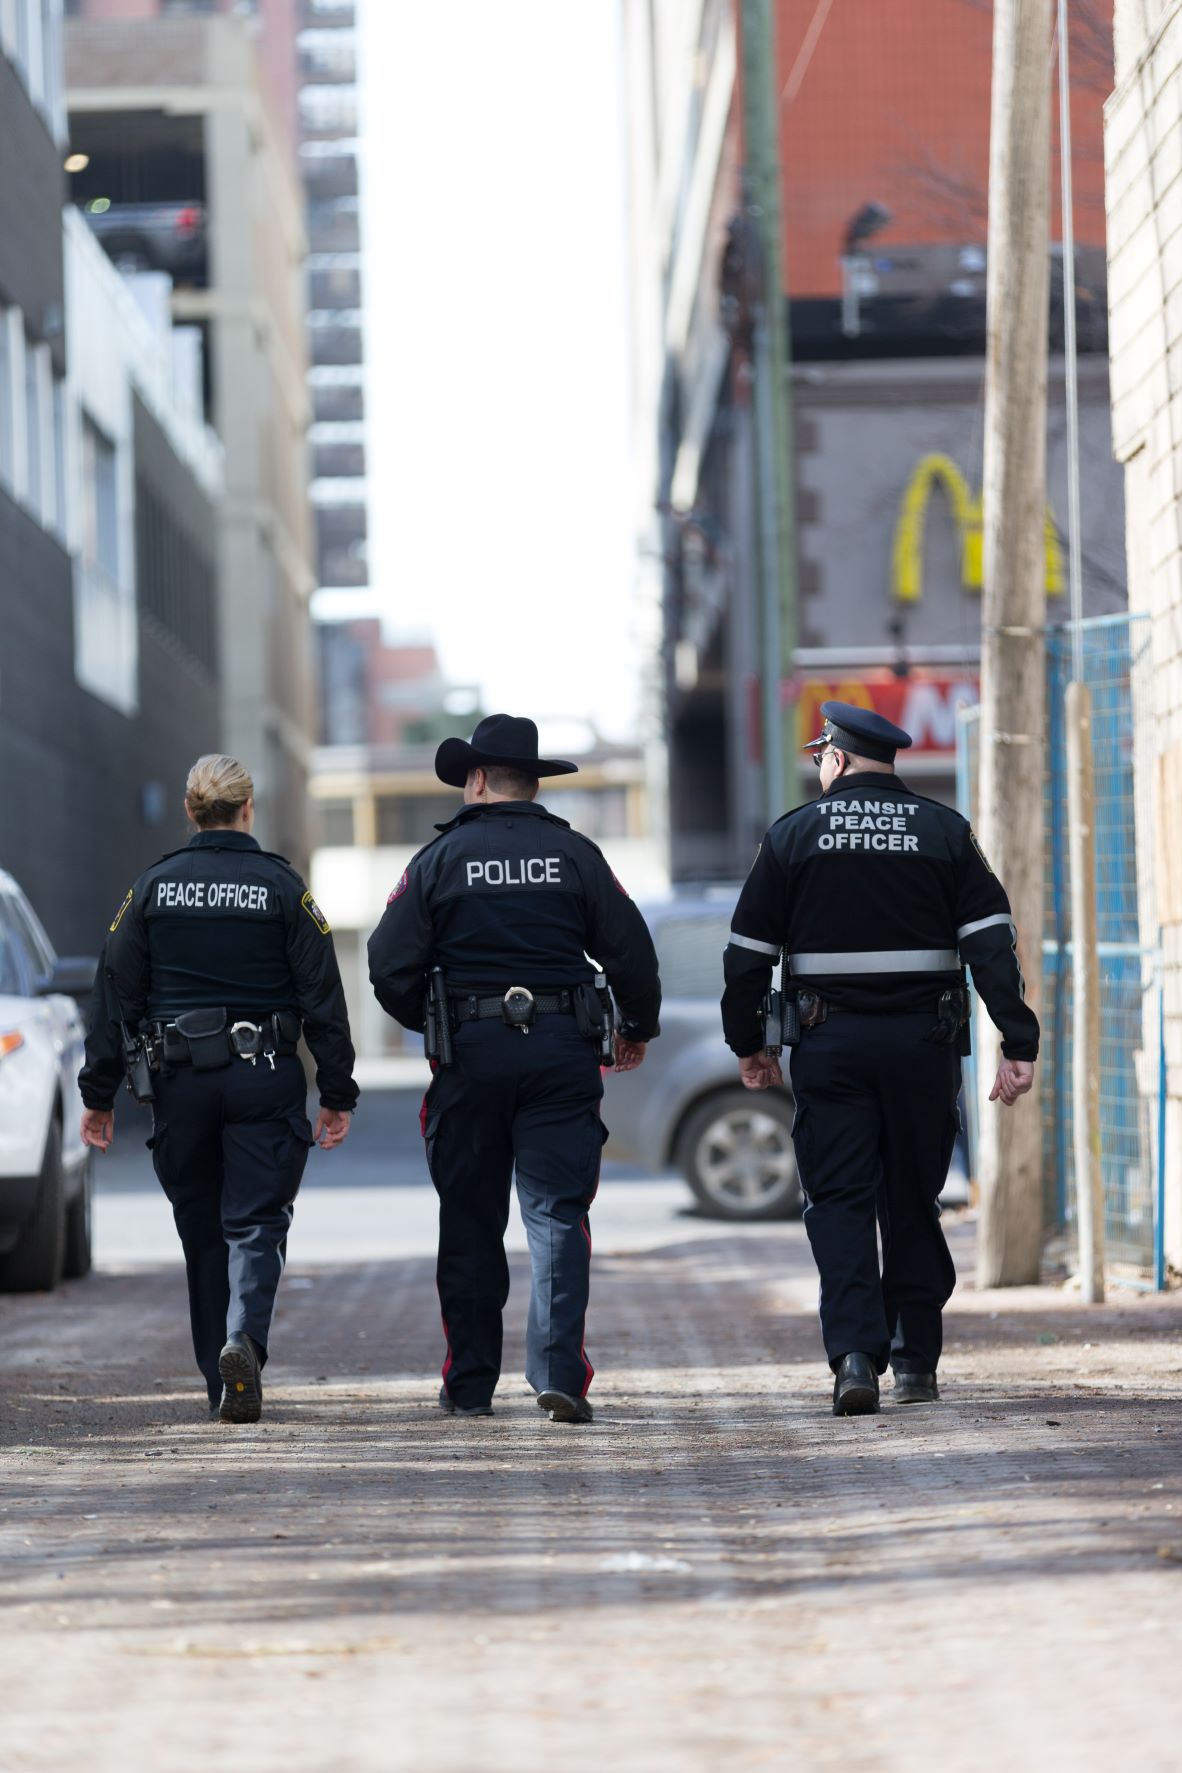 A Calgary peace officer, police officer and Transit peace officer walking side-by-side. 